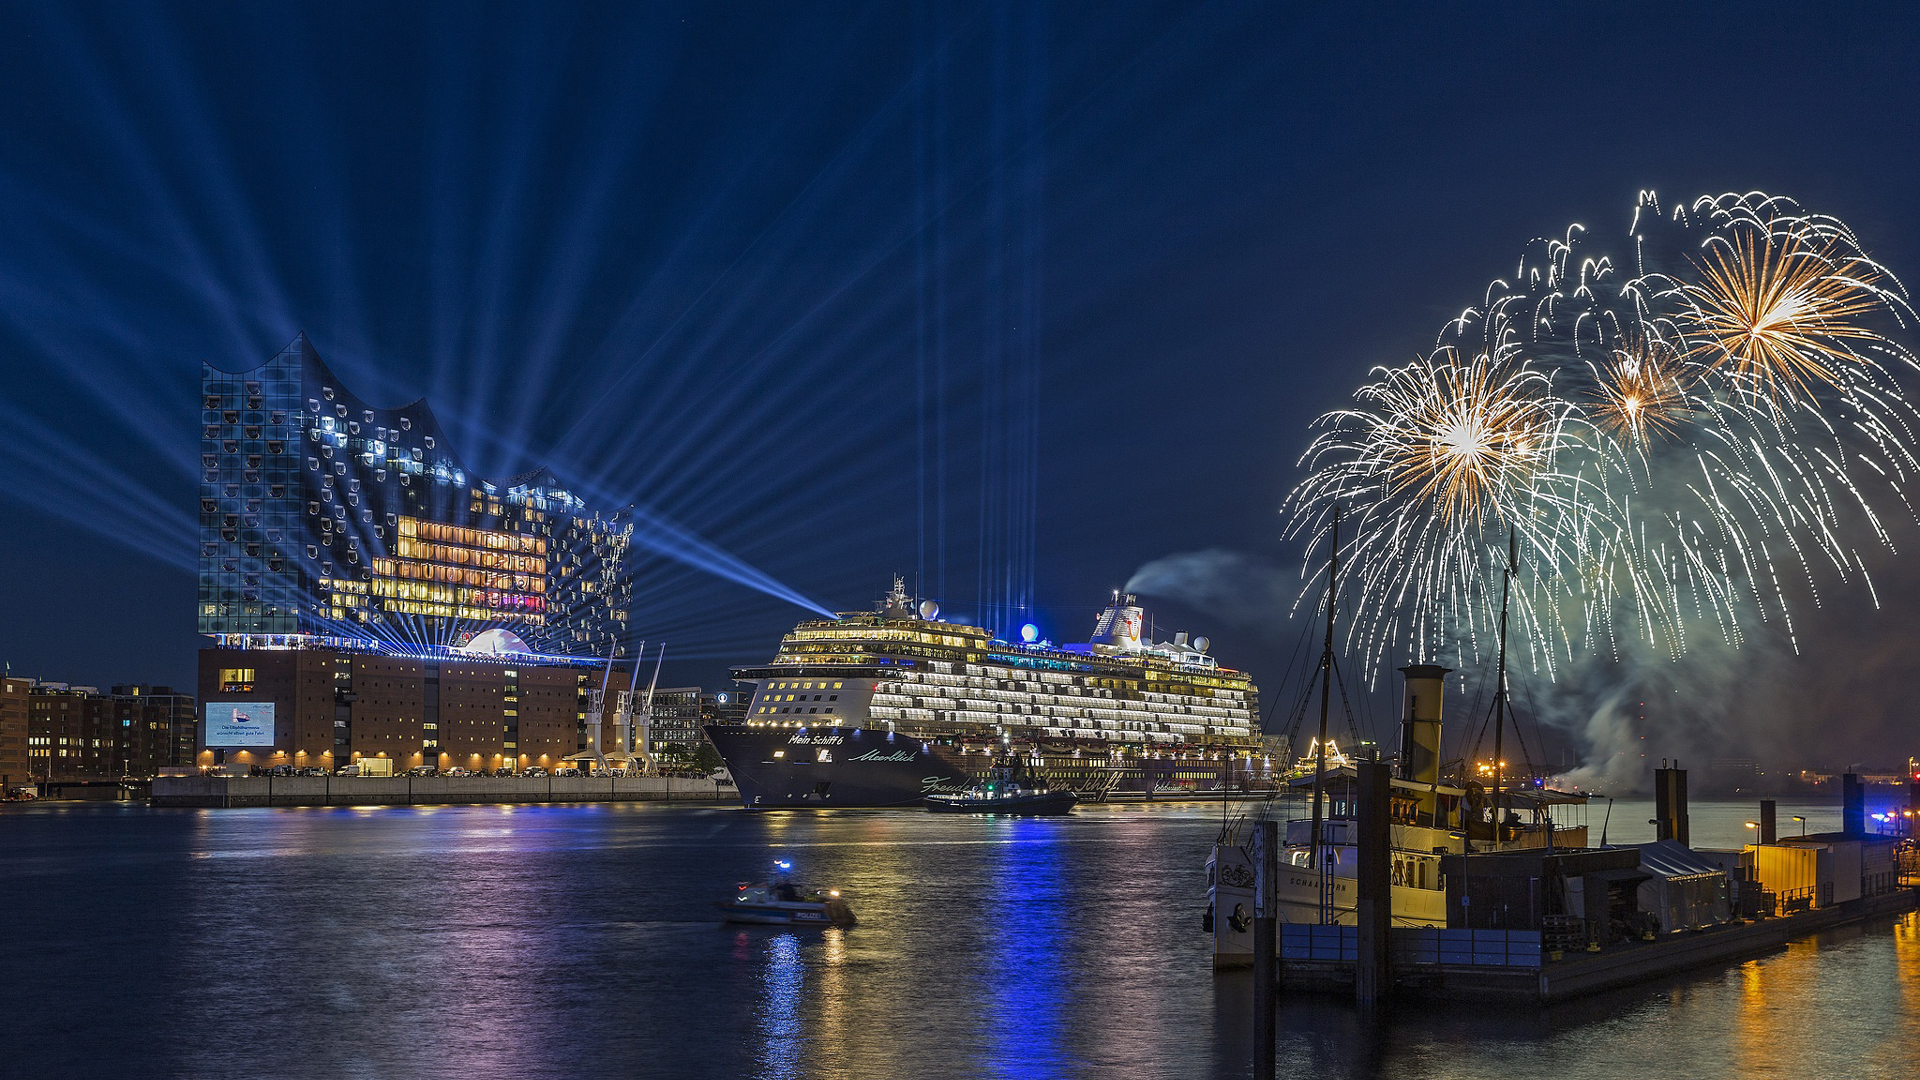 Black Cruise Ship With Blue Light Focusing And Fireworks On Side During Nighttime 2K Cruise Ship